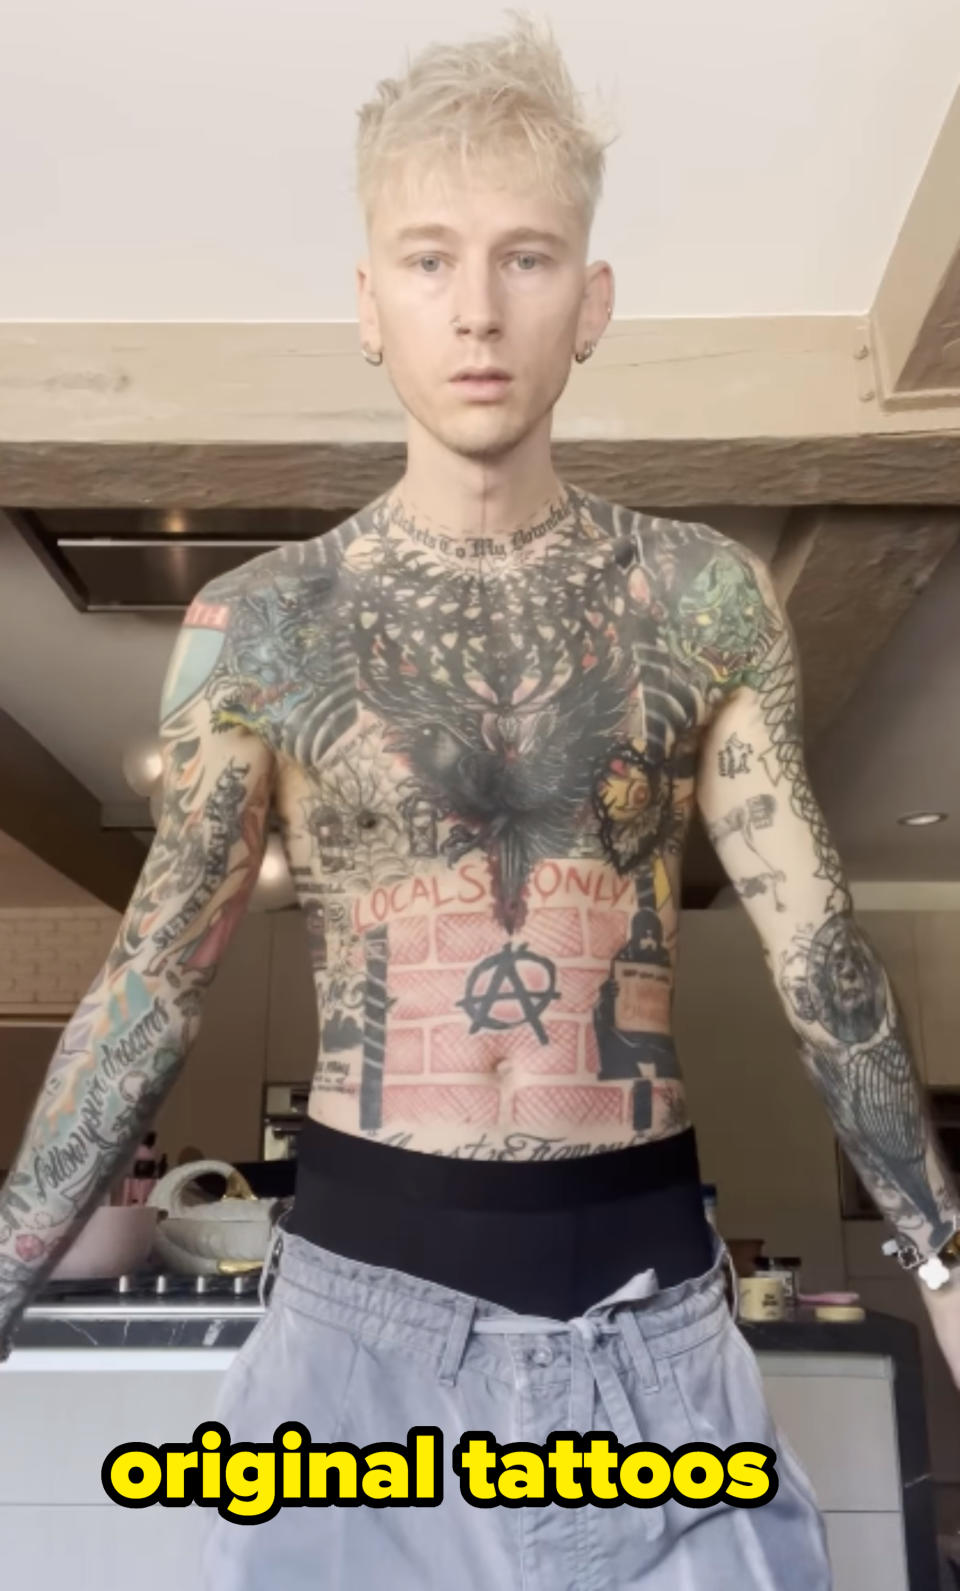 Man with tattoos on torso and arms, standing in a kitchen